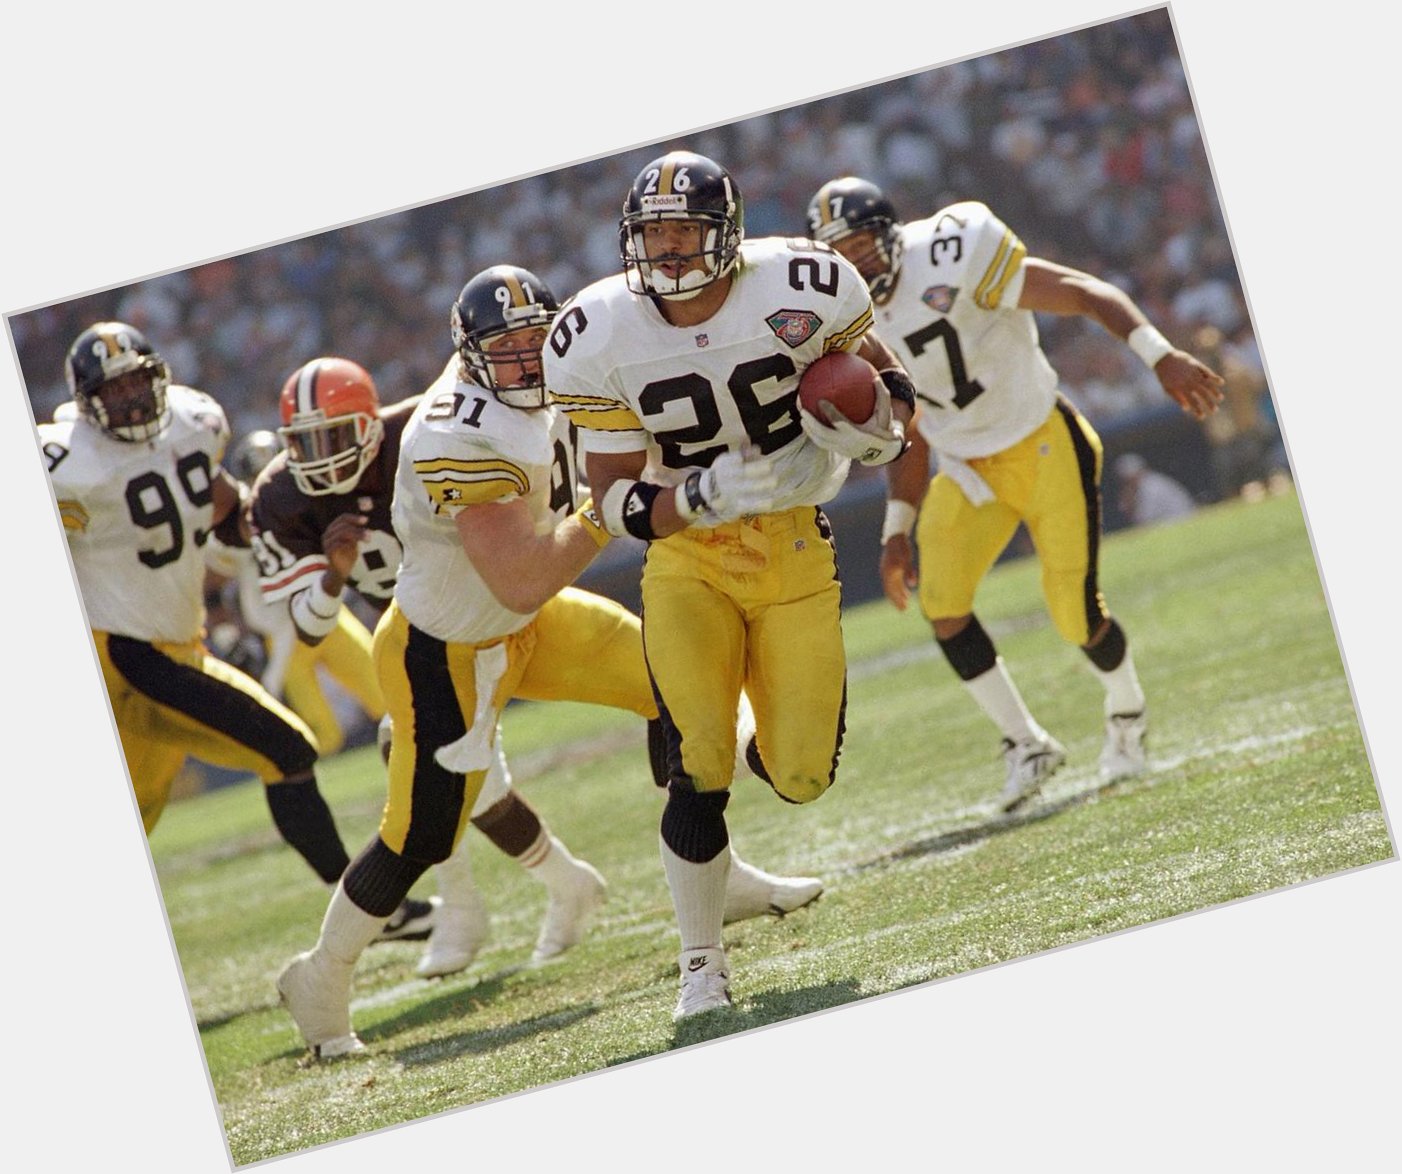 Happy Birthday to Rod Woodson, who turns 50 today! 